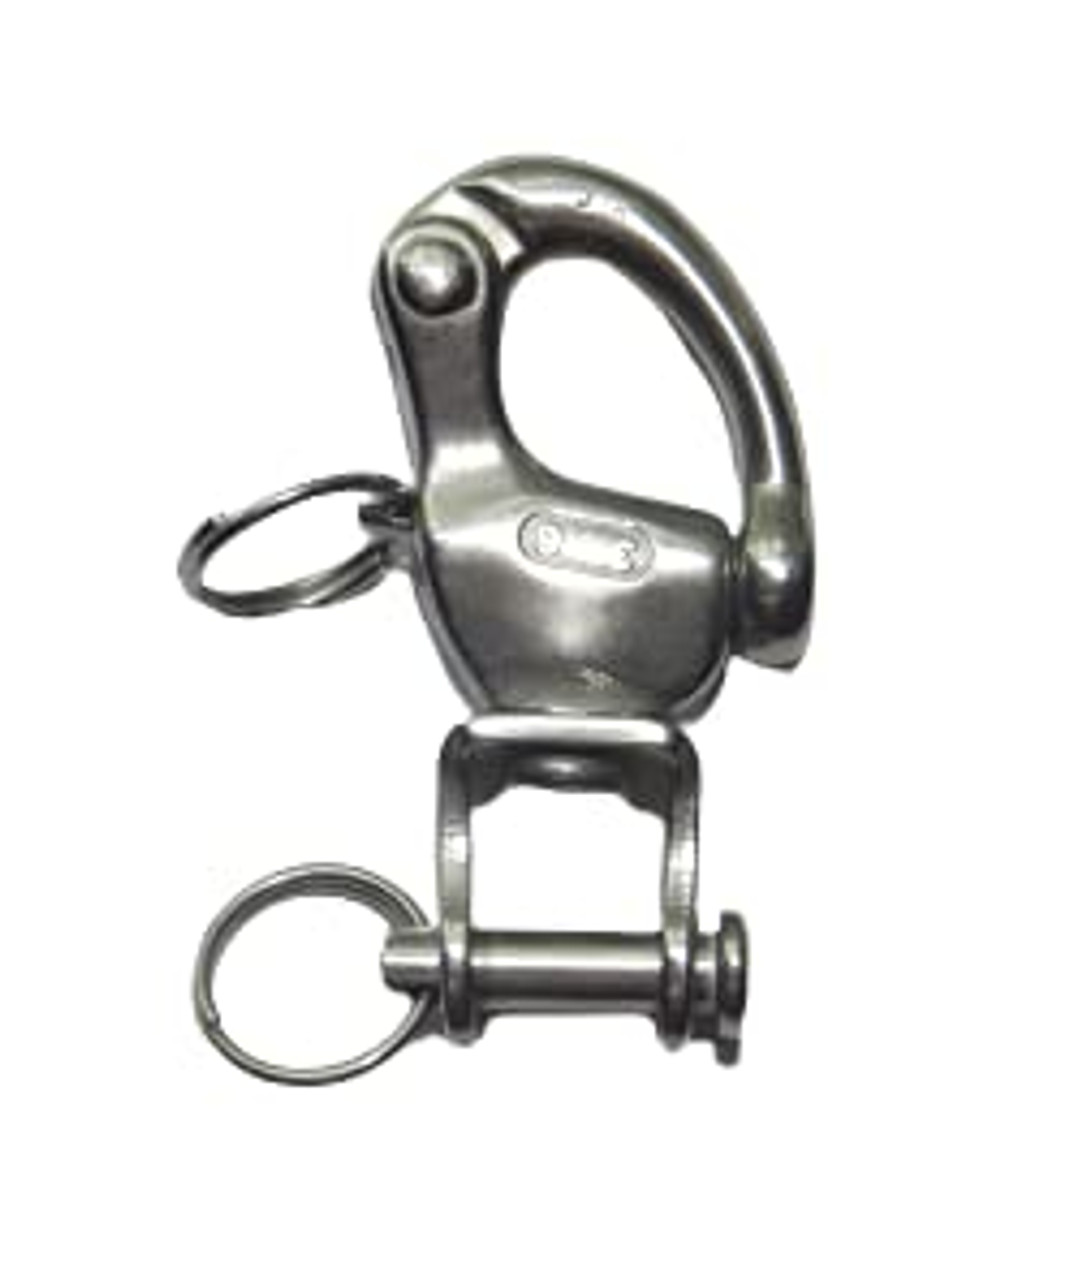 US Stainless Snap Shackle with Forged Swivel Jaw Type 2476 12mm (1/2)  Marine Grade 316 Stainless - US Stainless